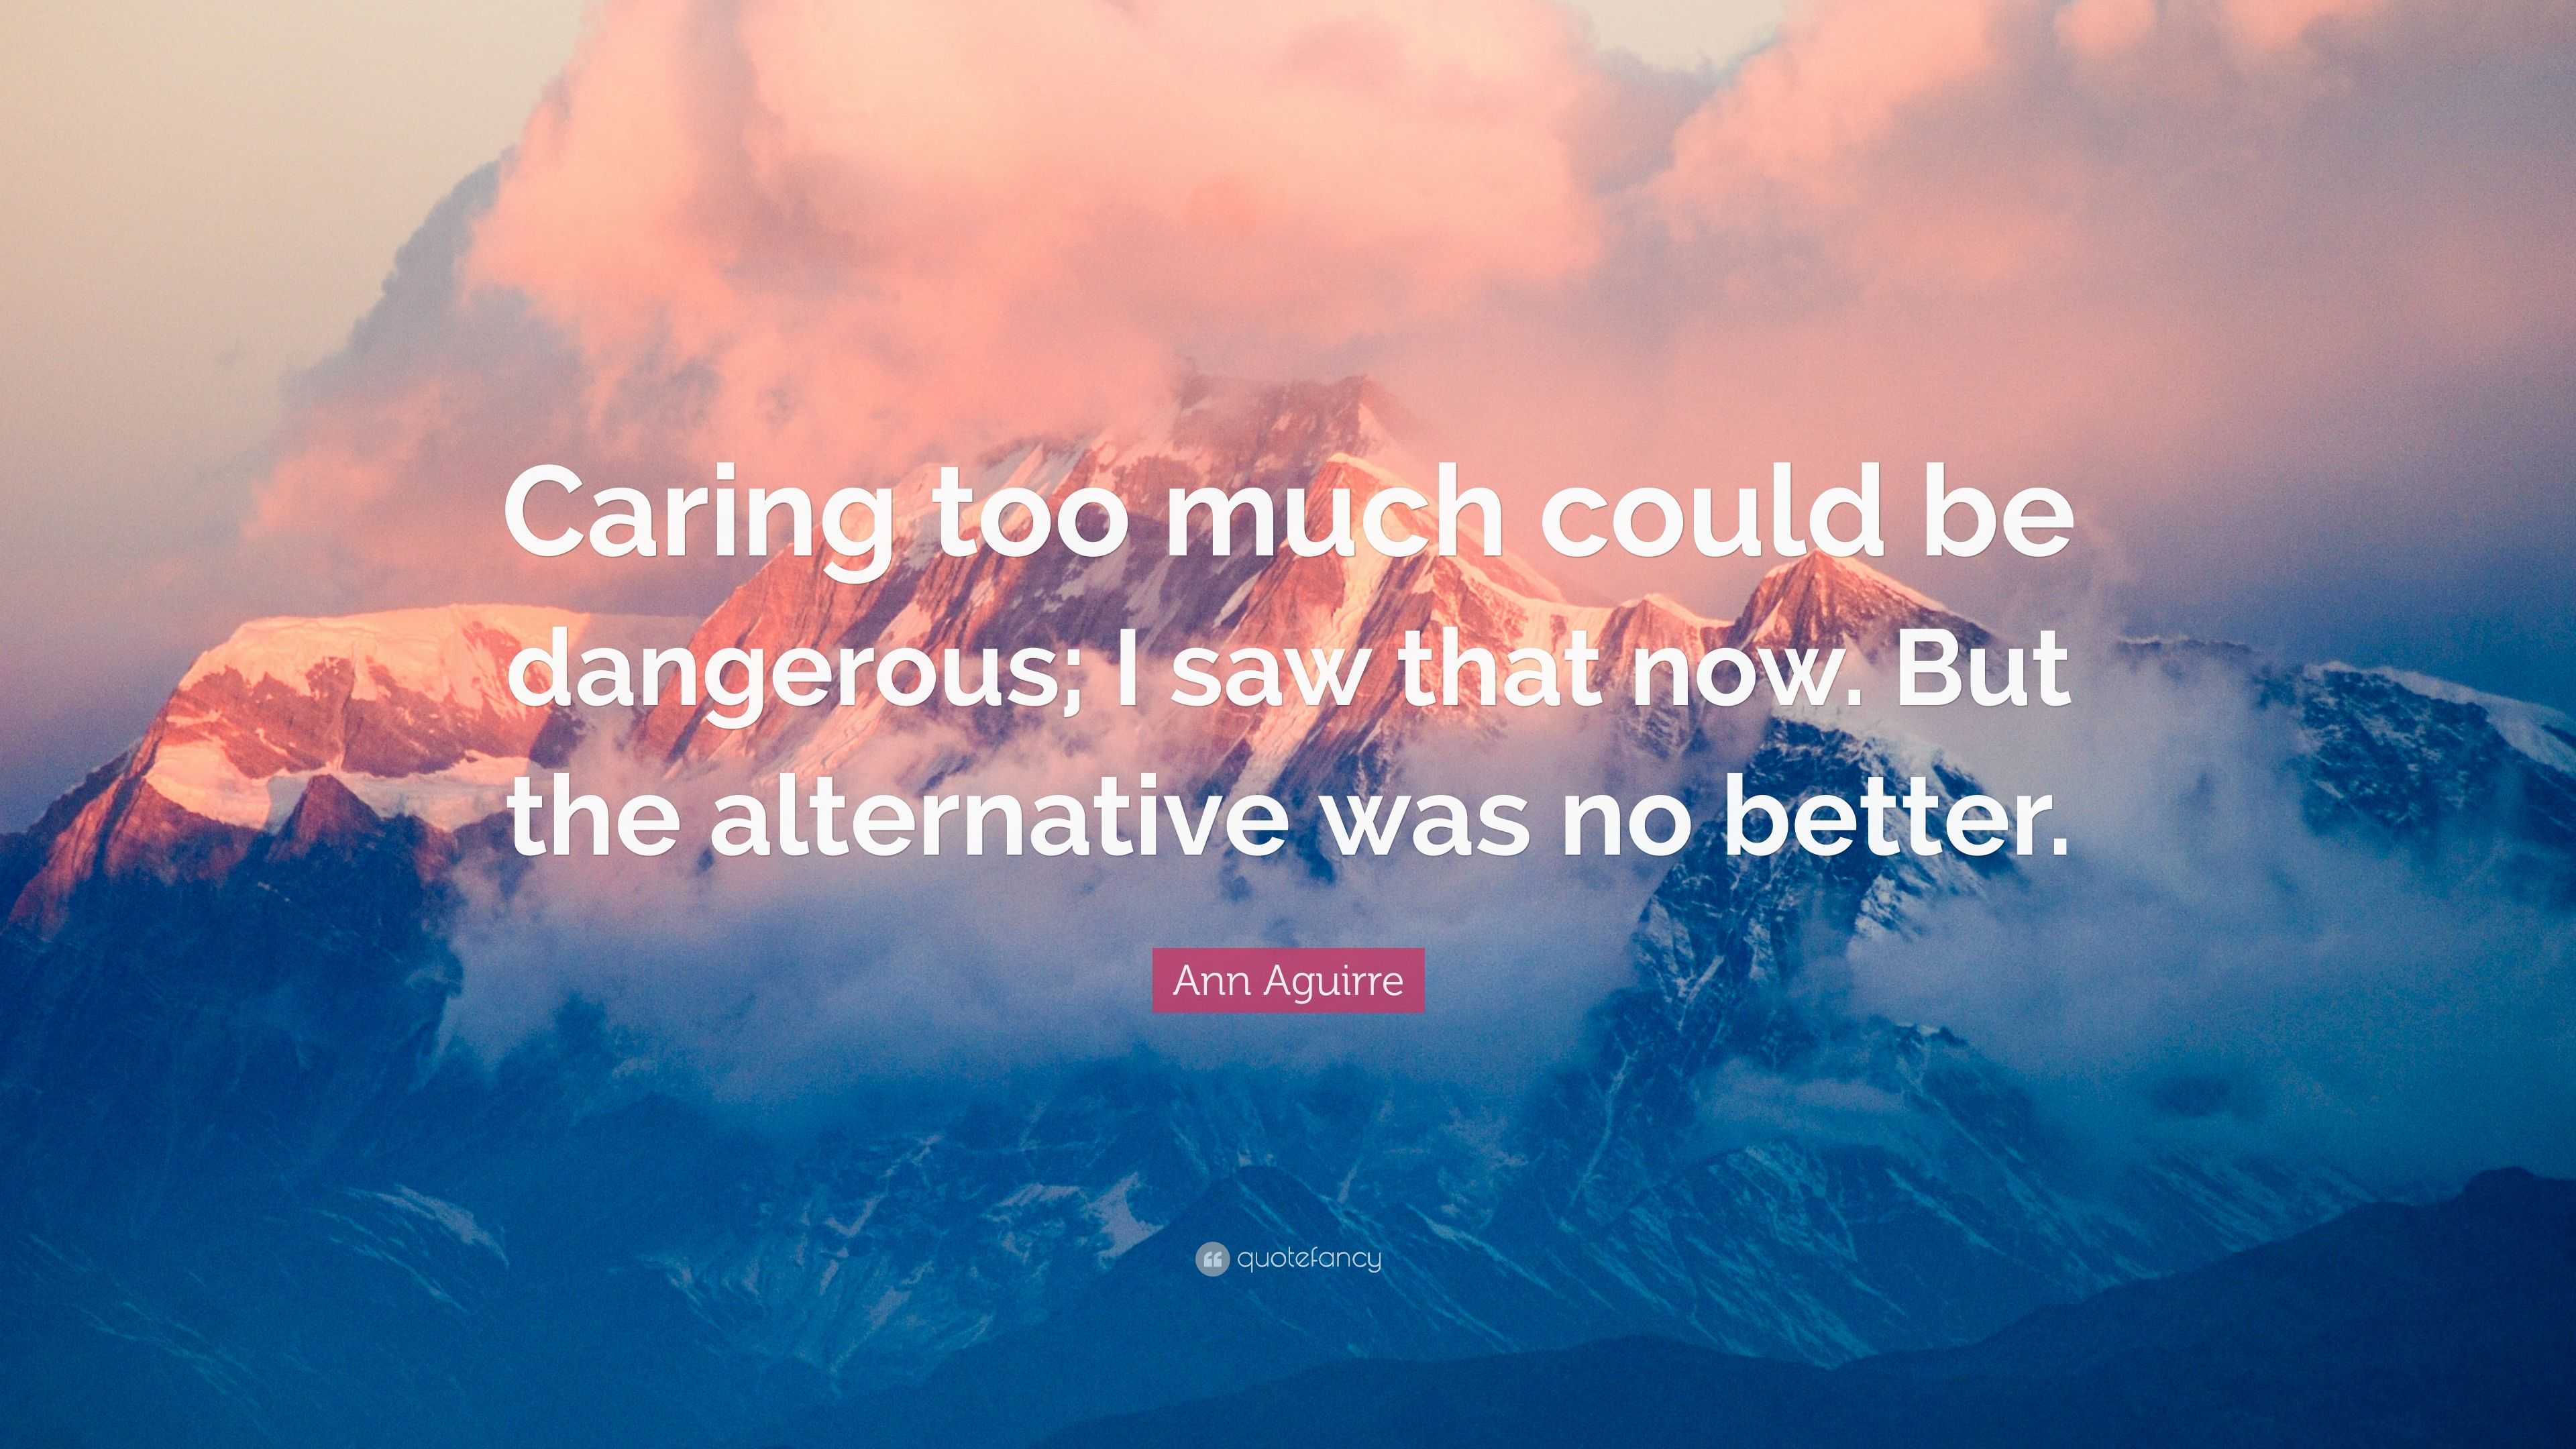 Ann Aguirre Quote: “Caring too much could be dangerous; I saw that now ...